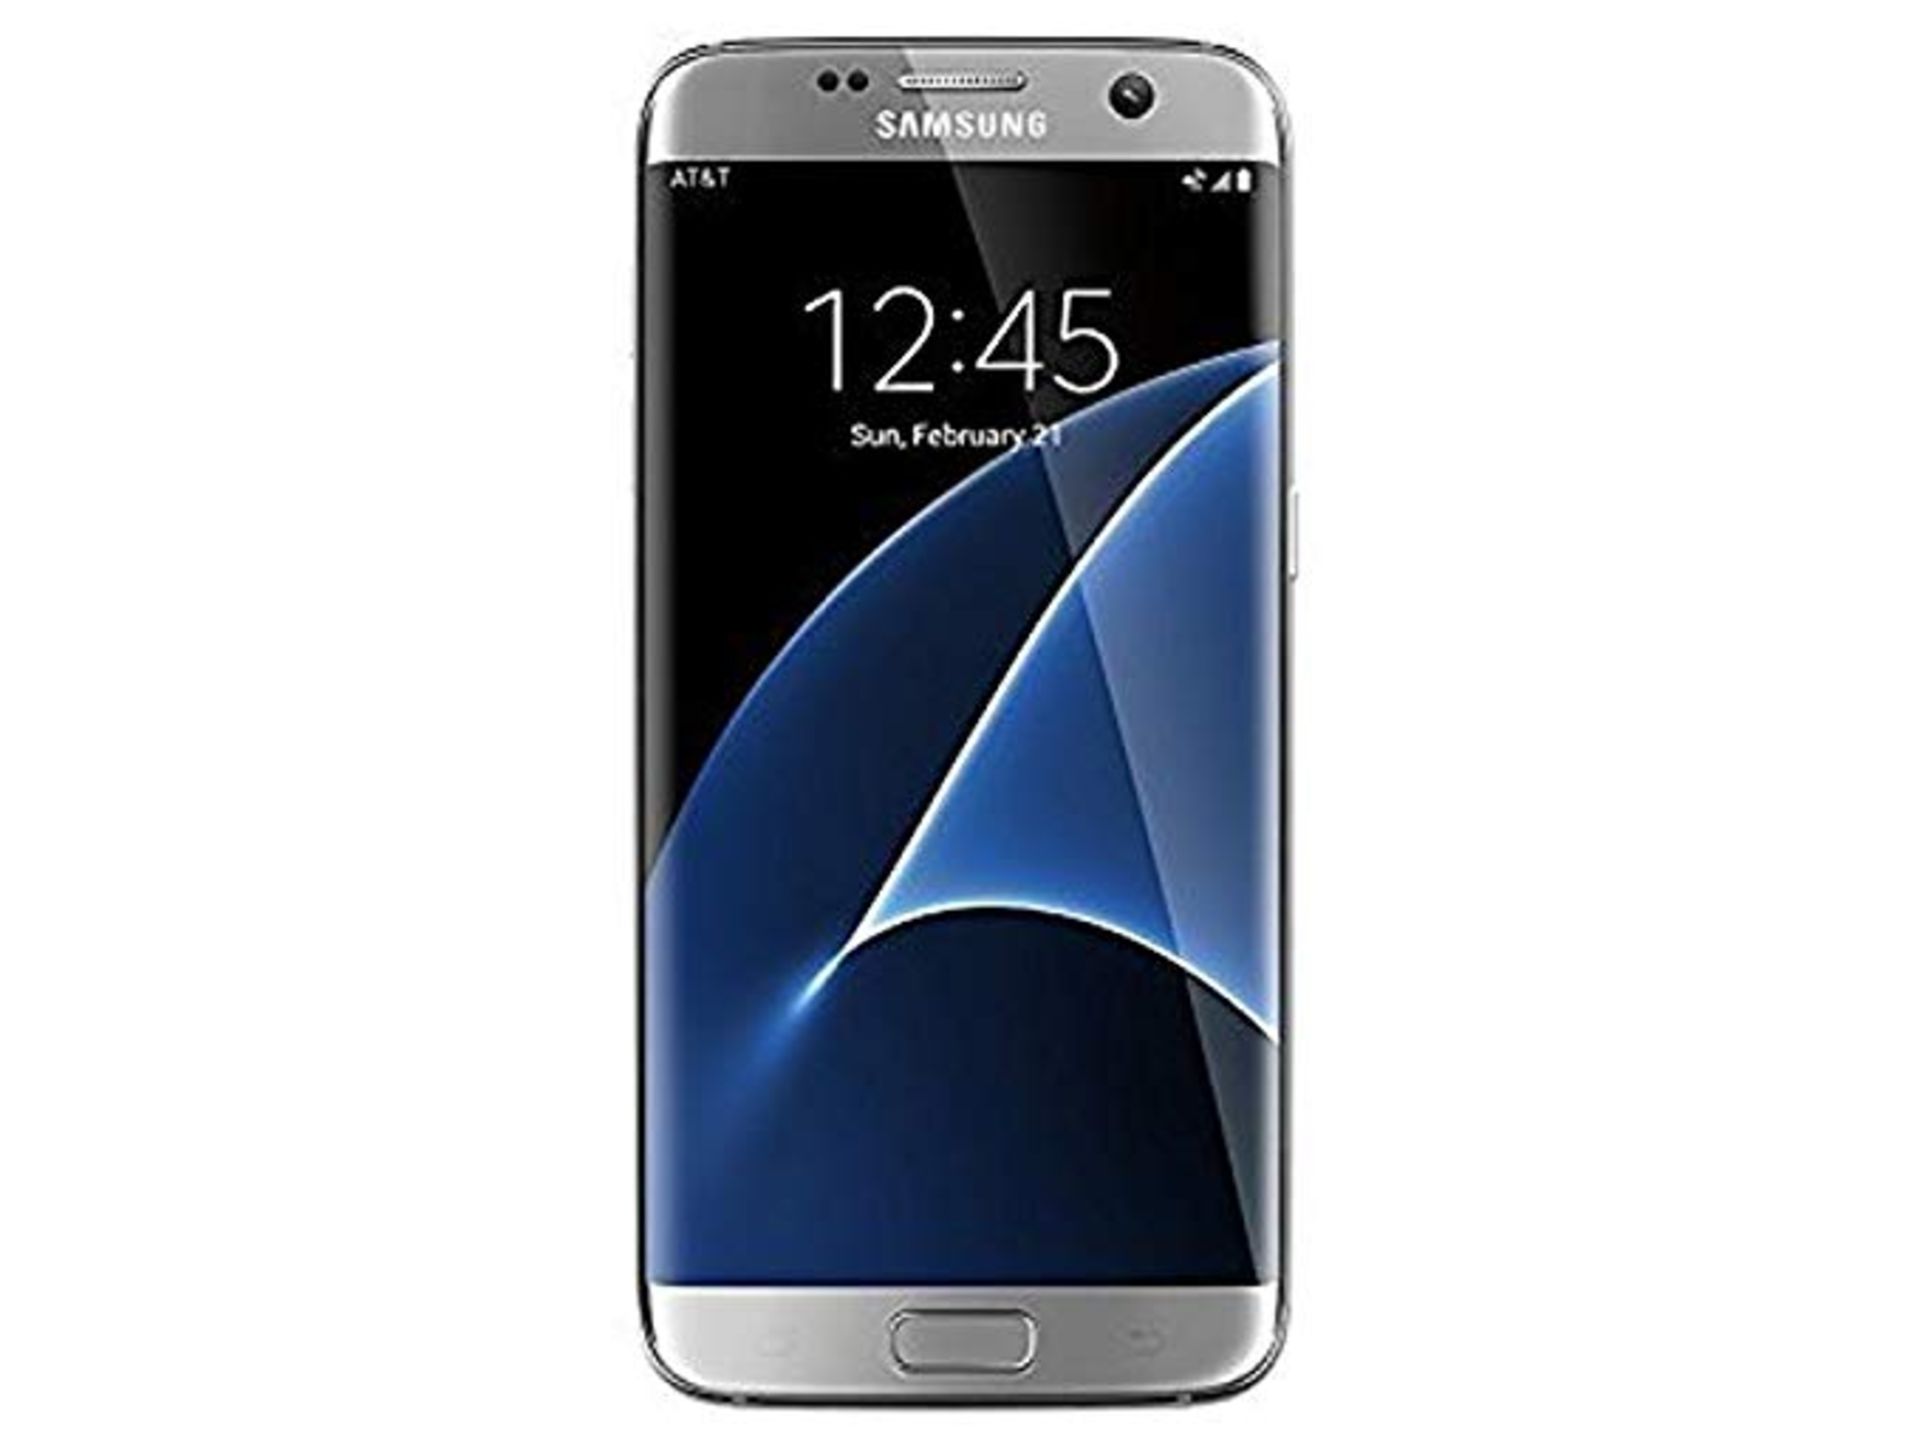 Grade A Samsung S7 Edge (G935A/T/V/P ) Colours May Vary Item available approx 12 working days after